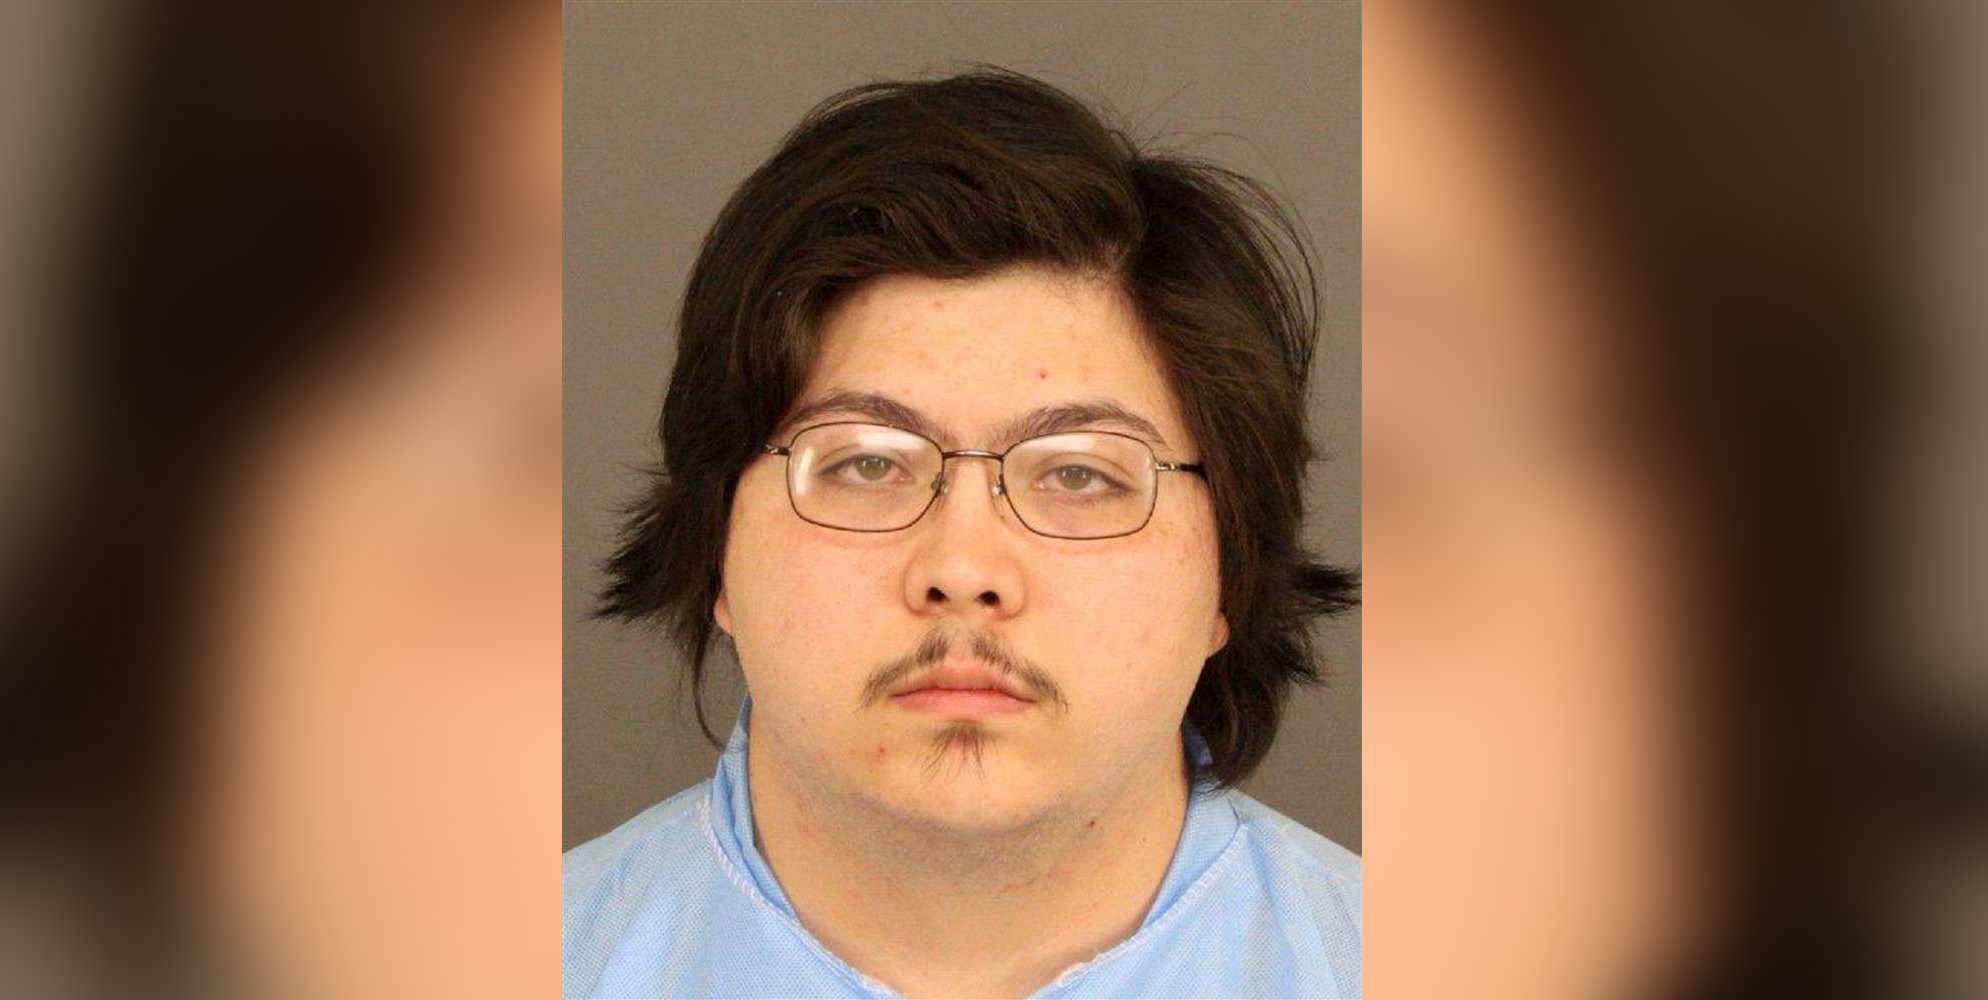 PHOTO: Joseph Michael Lopez, 22, was held without bond pending a first-degree murder charge in the death of Natalie Bollinger, 19, of Broomfield, Colorado. 